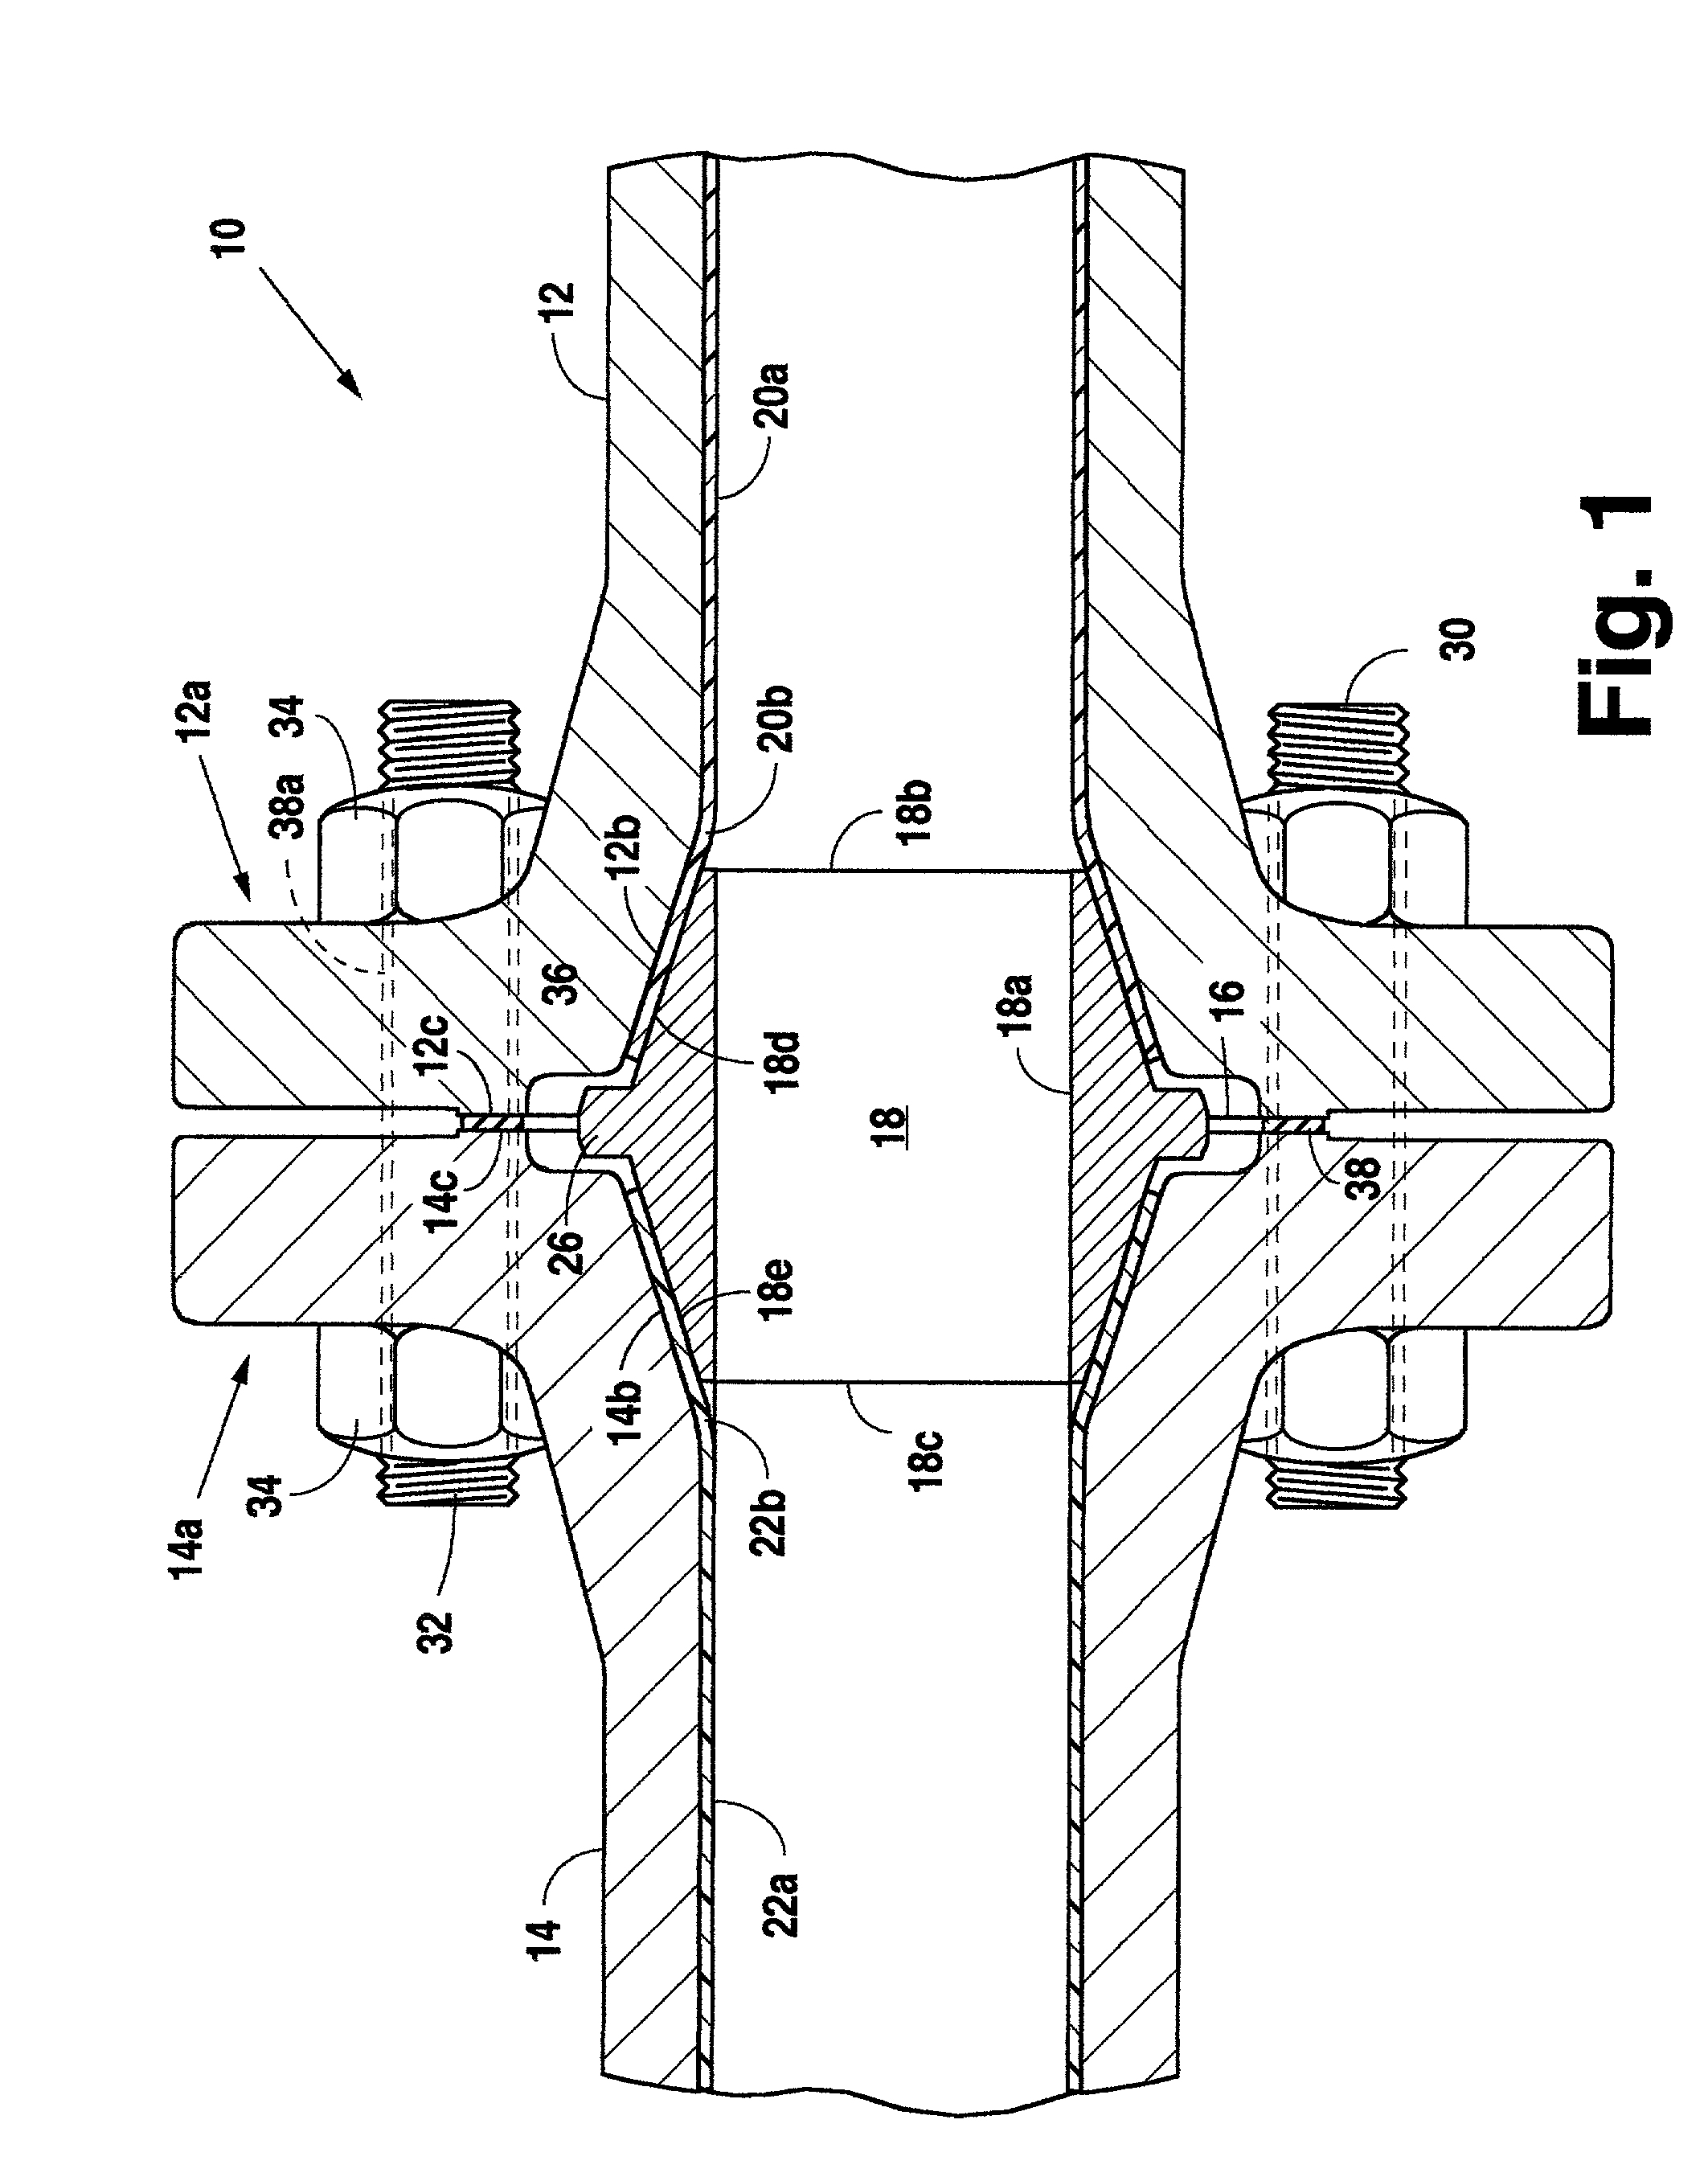 Method and a coupler for joining two steel pipes